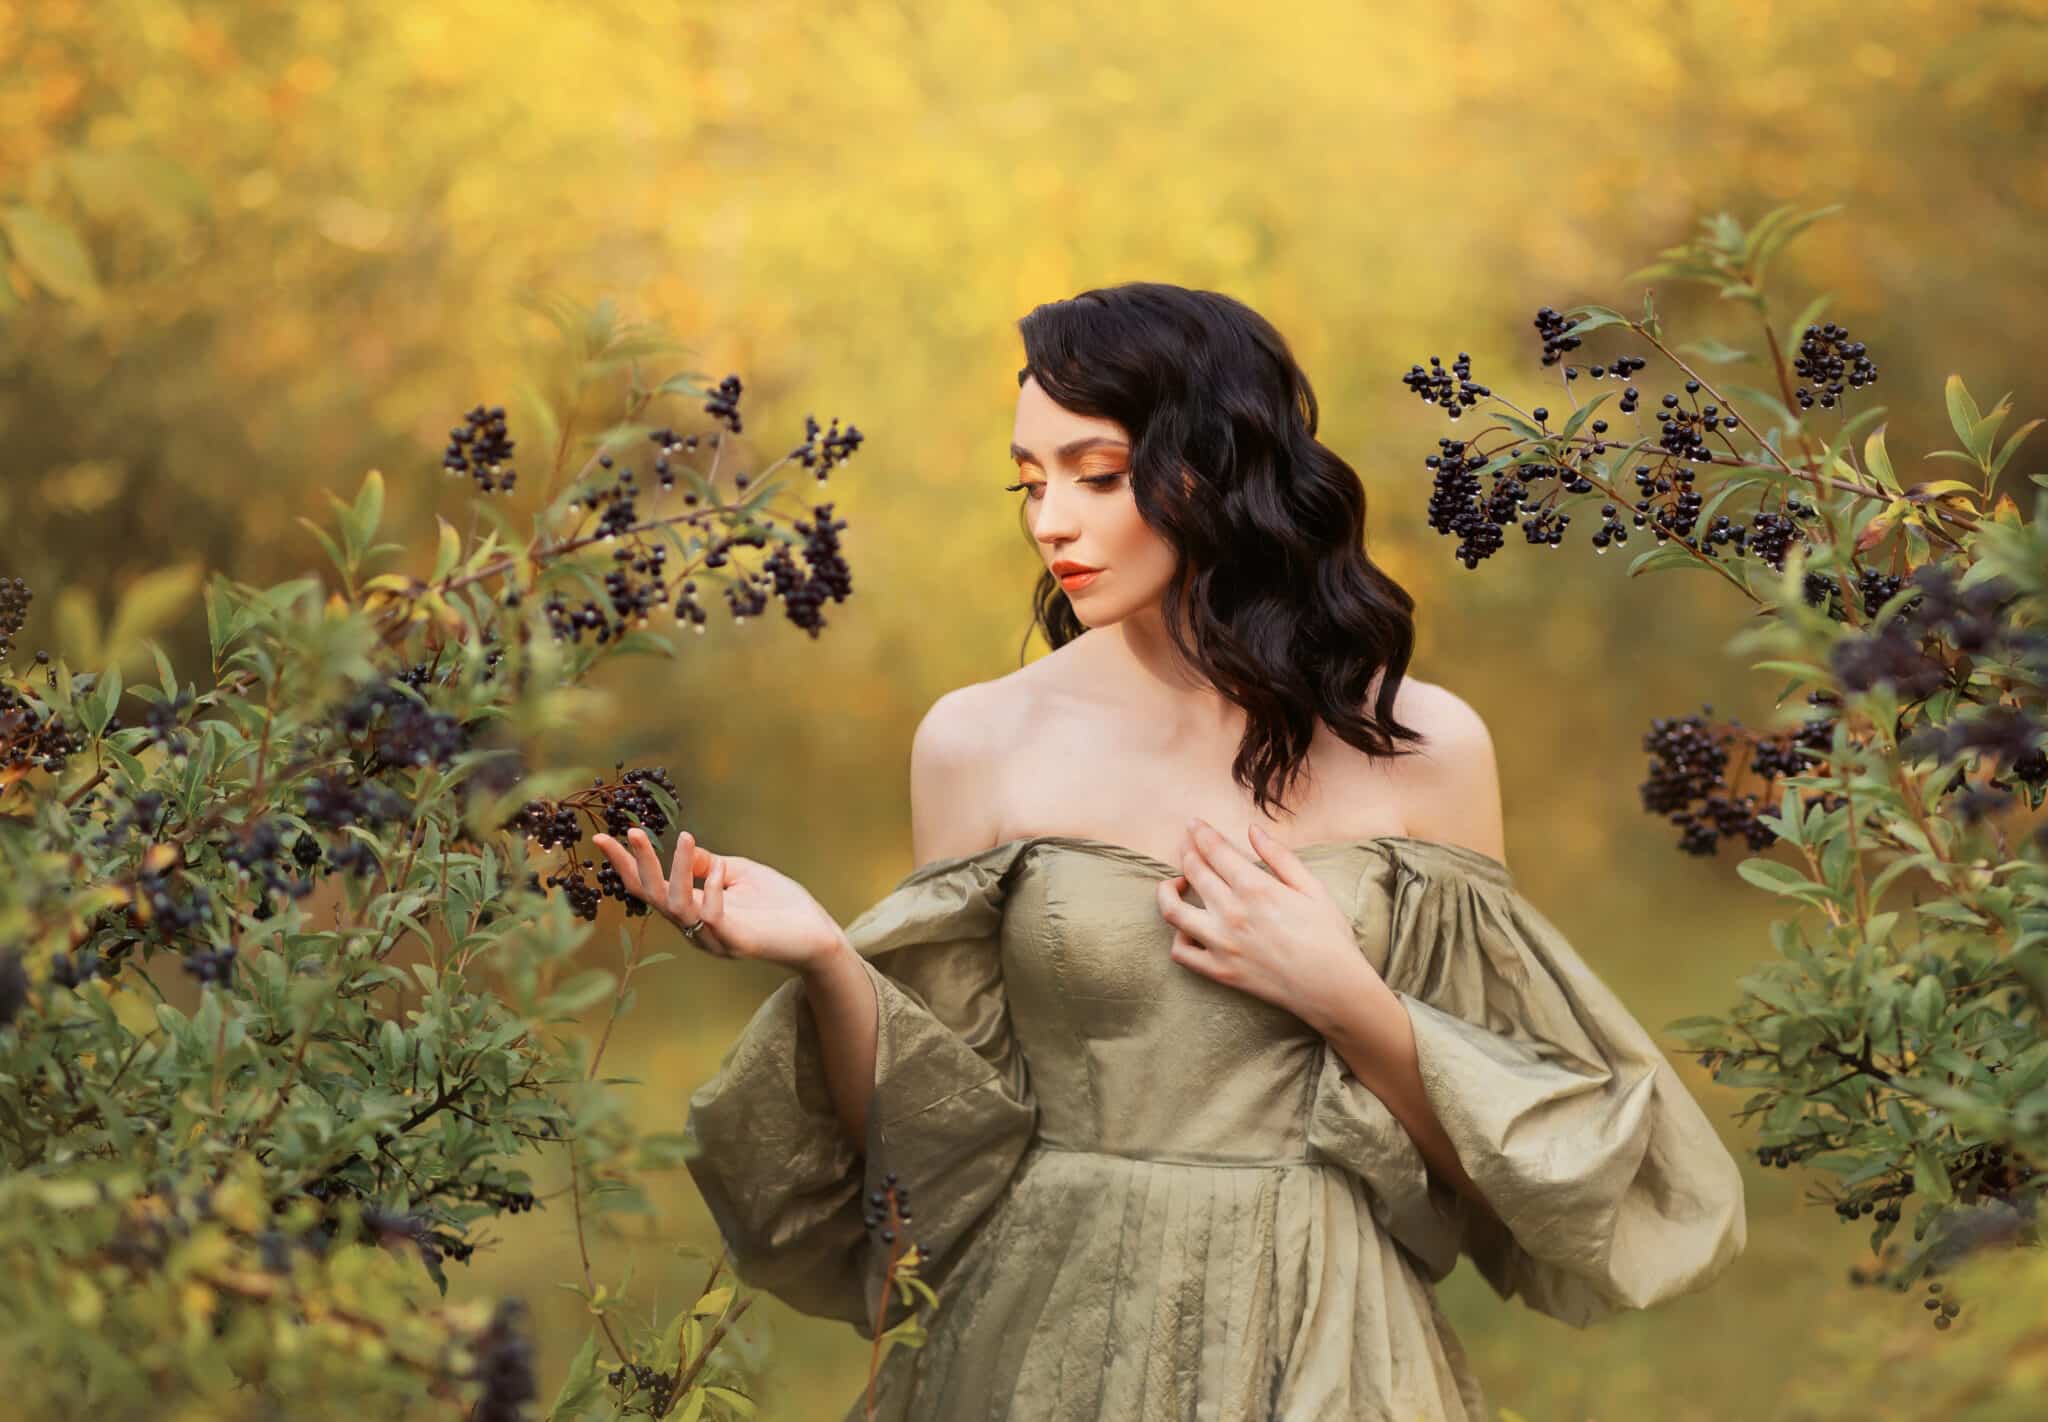 Romantic lady fantasy girl princess touches ripe wet black berries. Art photo, portrait of woman queen walking in autumn nature. Medieval dress vintage old style bare sexy off shoulder puffed sleeves.